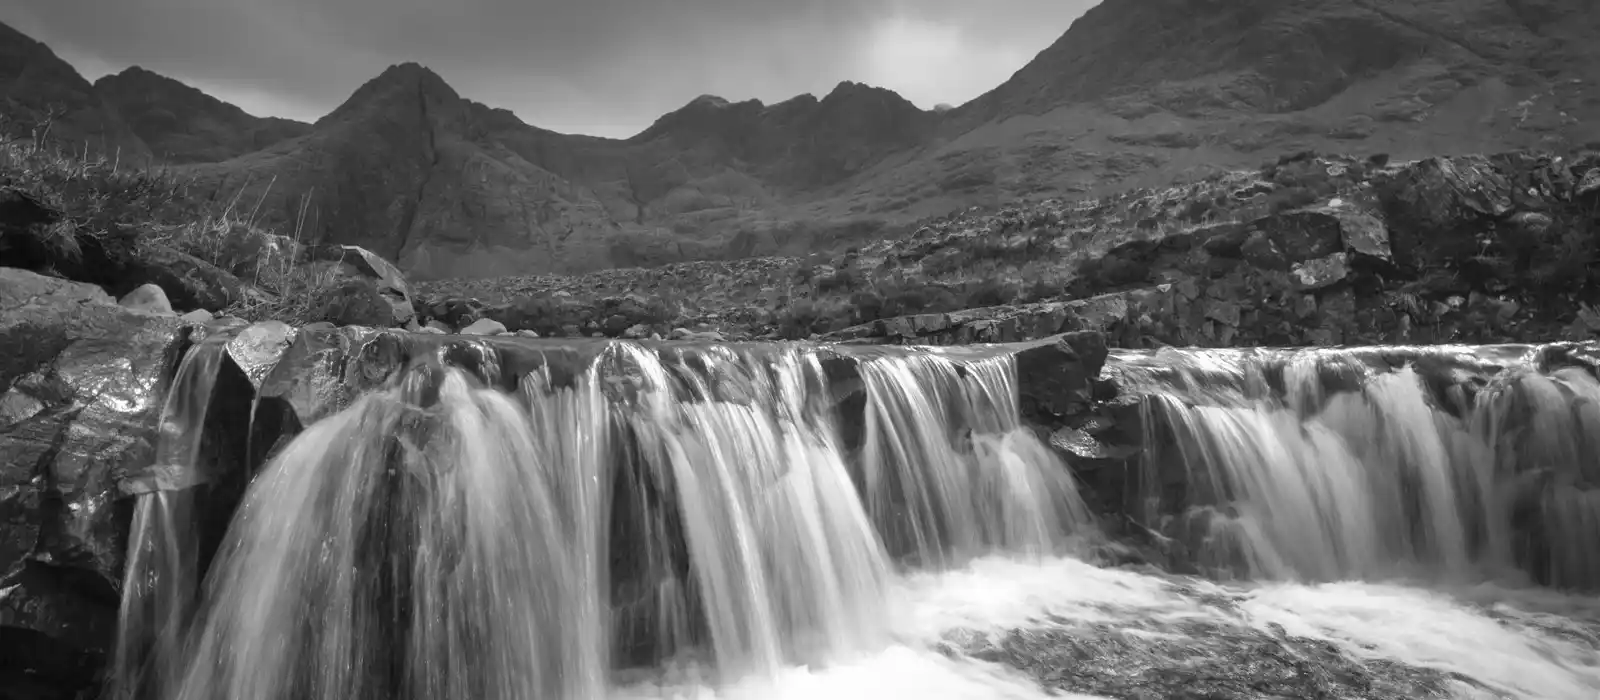 The Fairy Pools in the Island of Skye